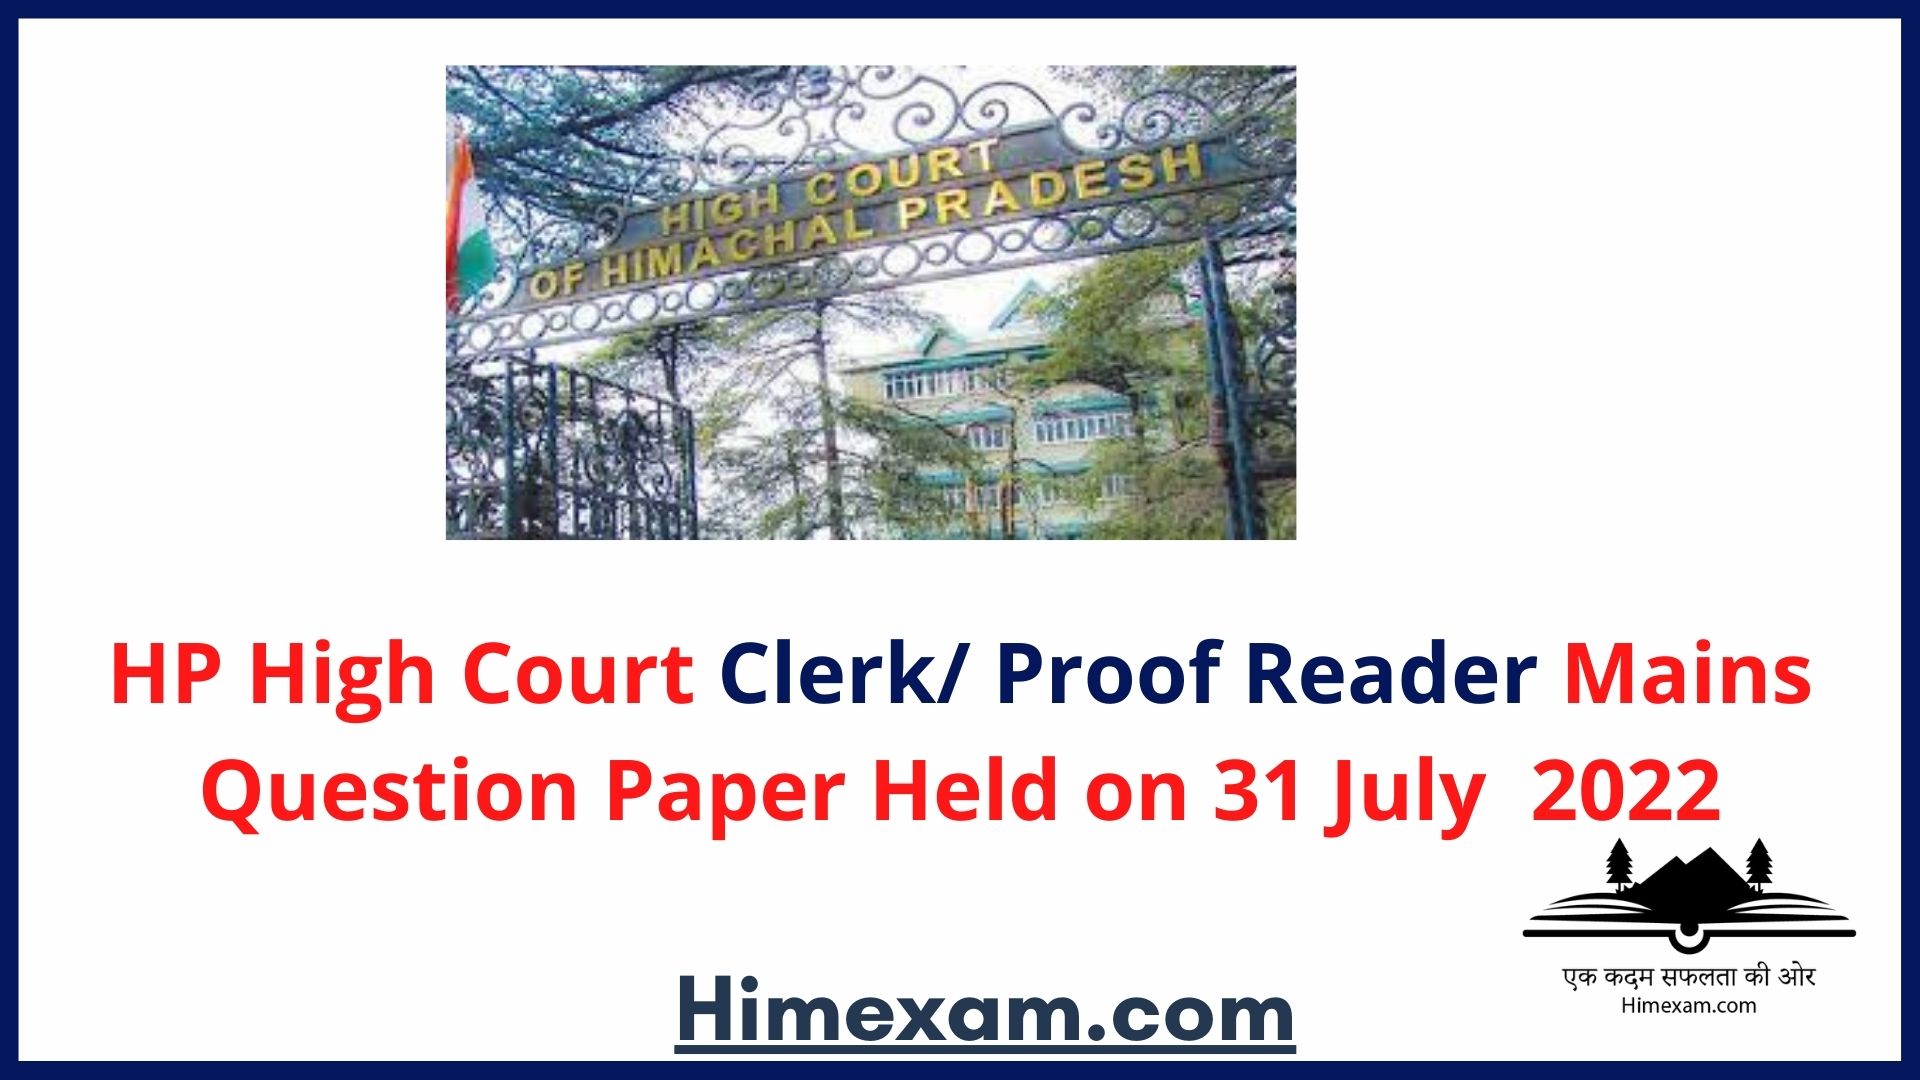 HP High Court Clerk/ Proof Reader Mains Question Paper Held on 31 July 2022